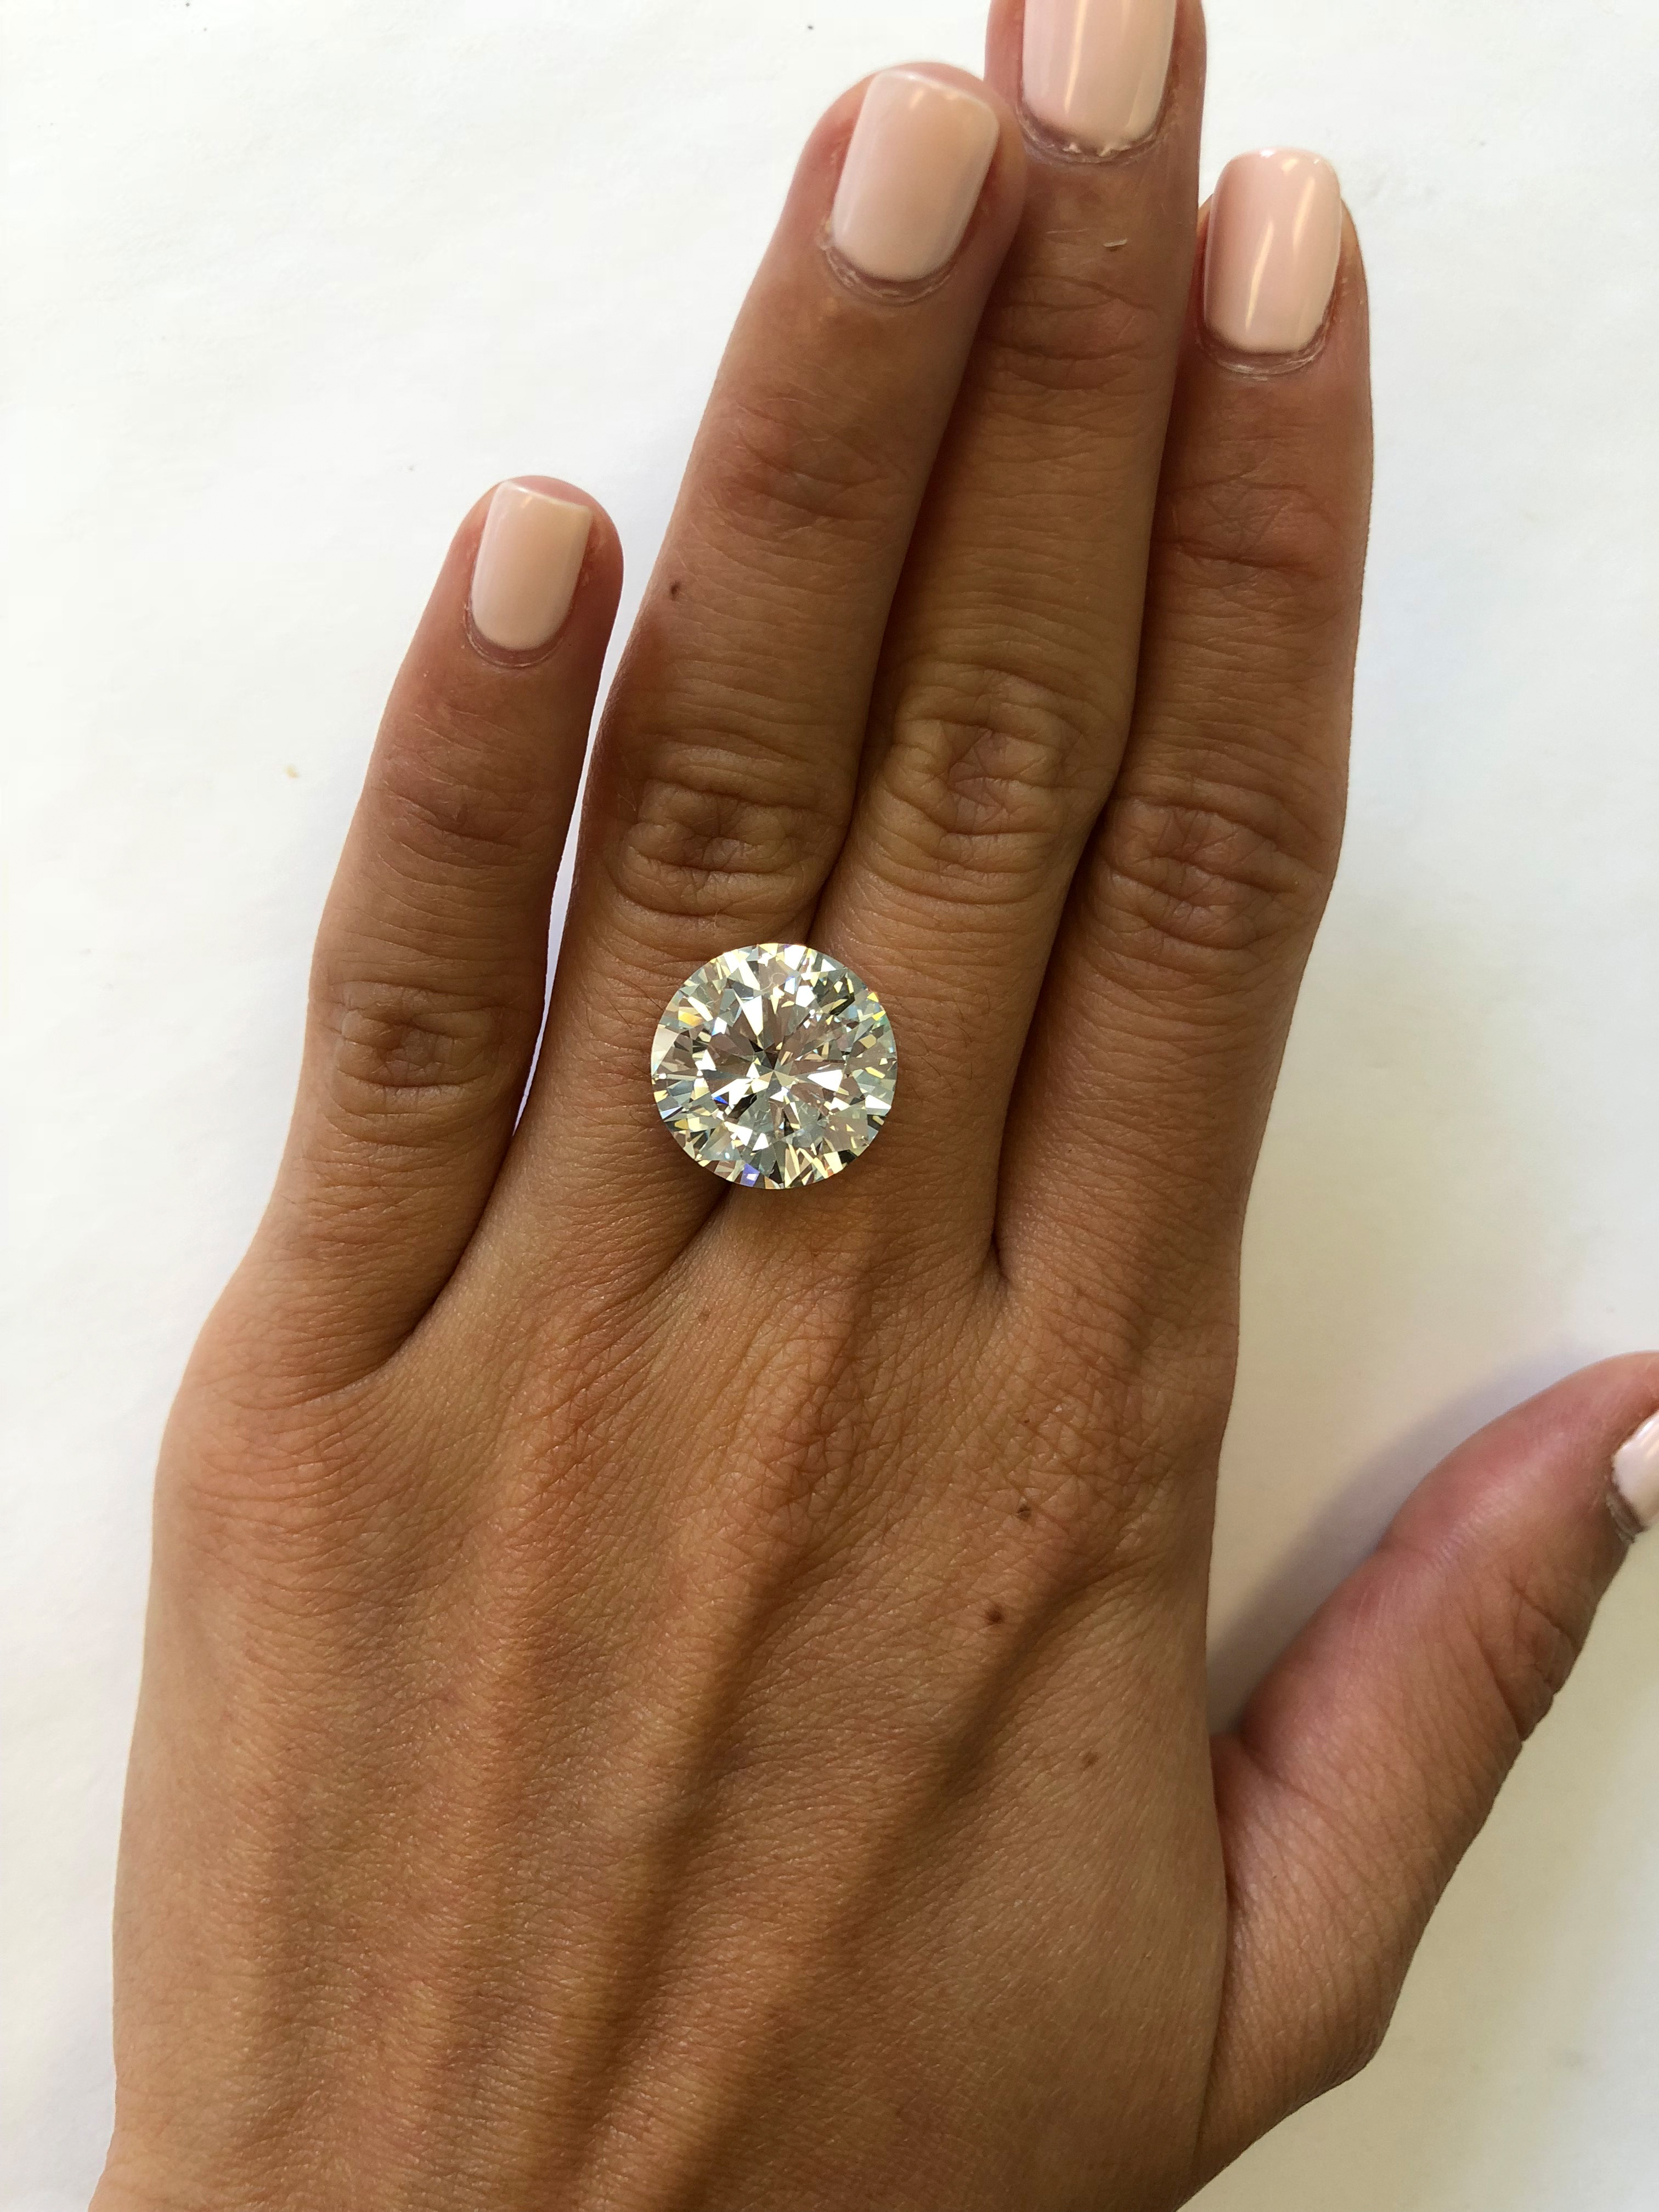 This Is What a Diamond Looks Like at Every Size—from .5 Carats to 10